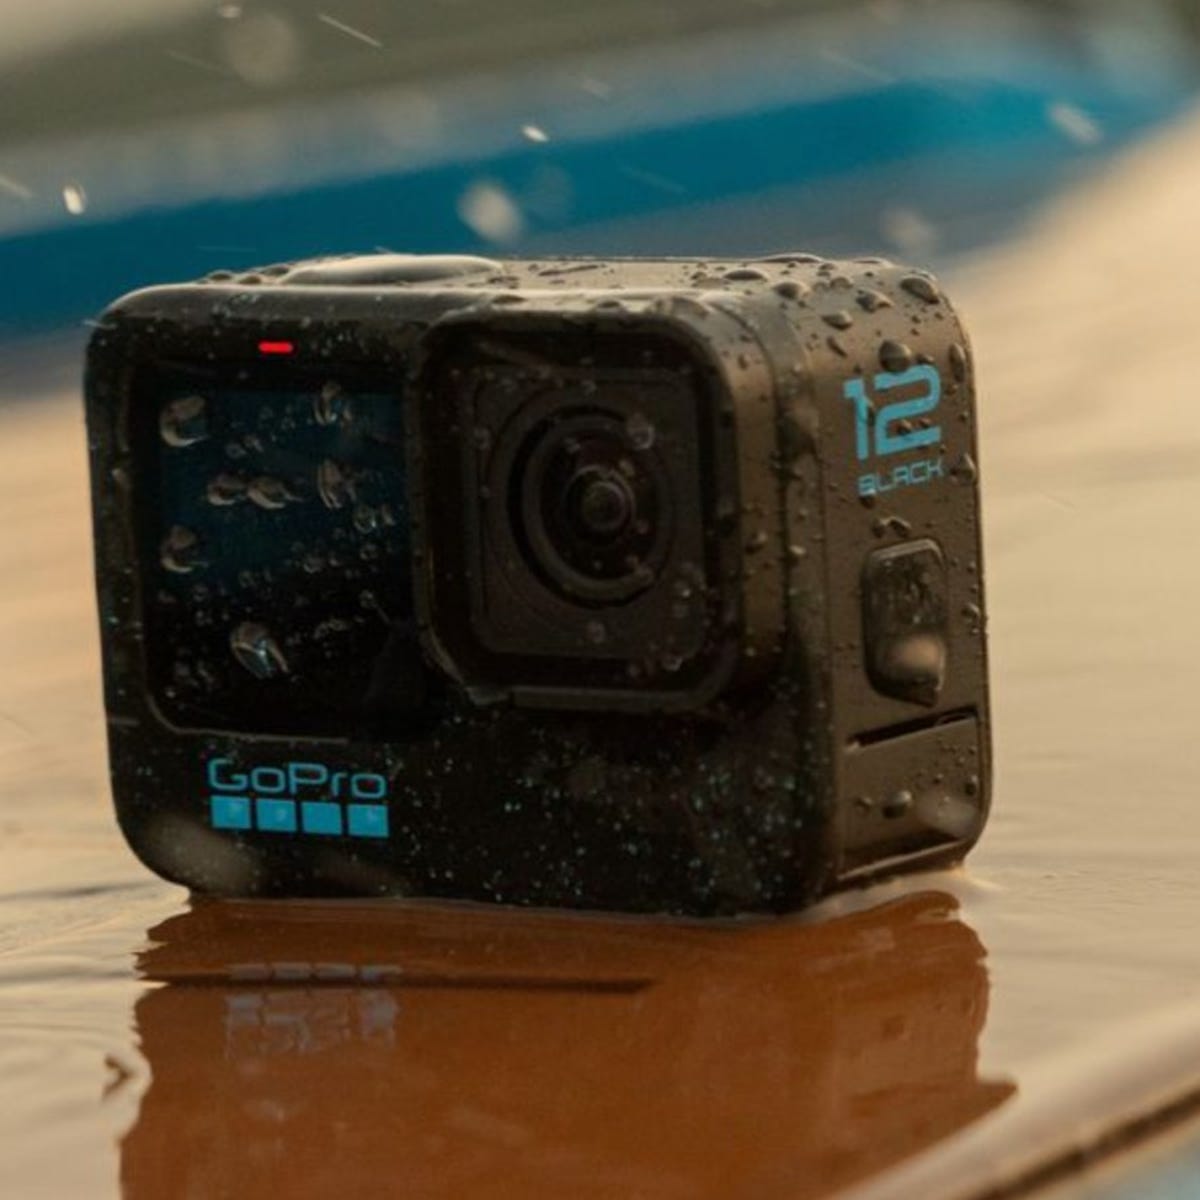 GoPro's new Hero 12 Black gets the action camera upgrade we've all